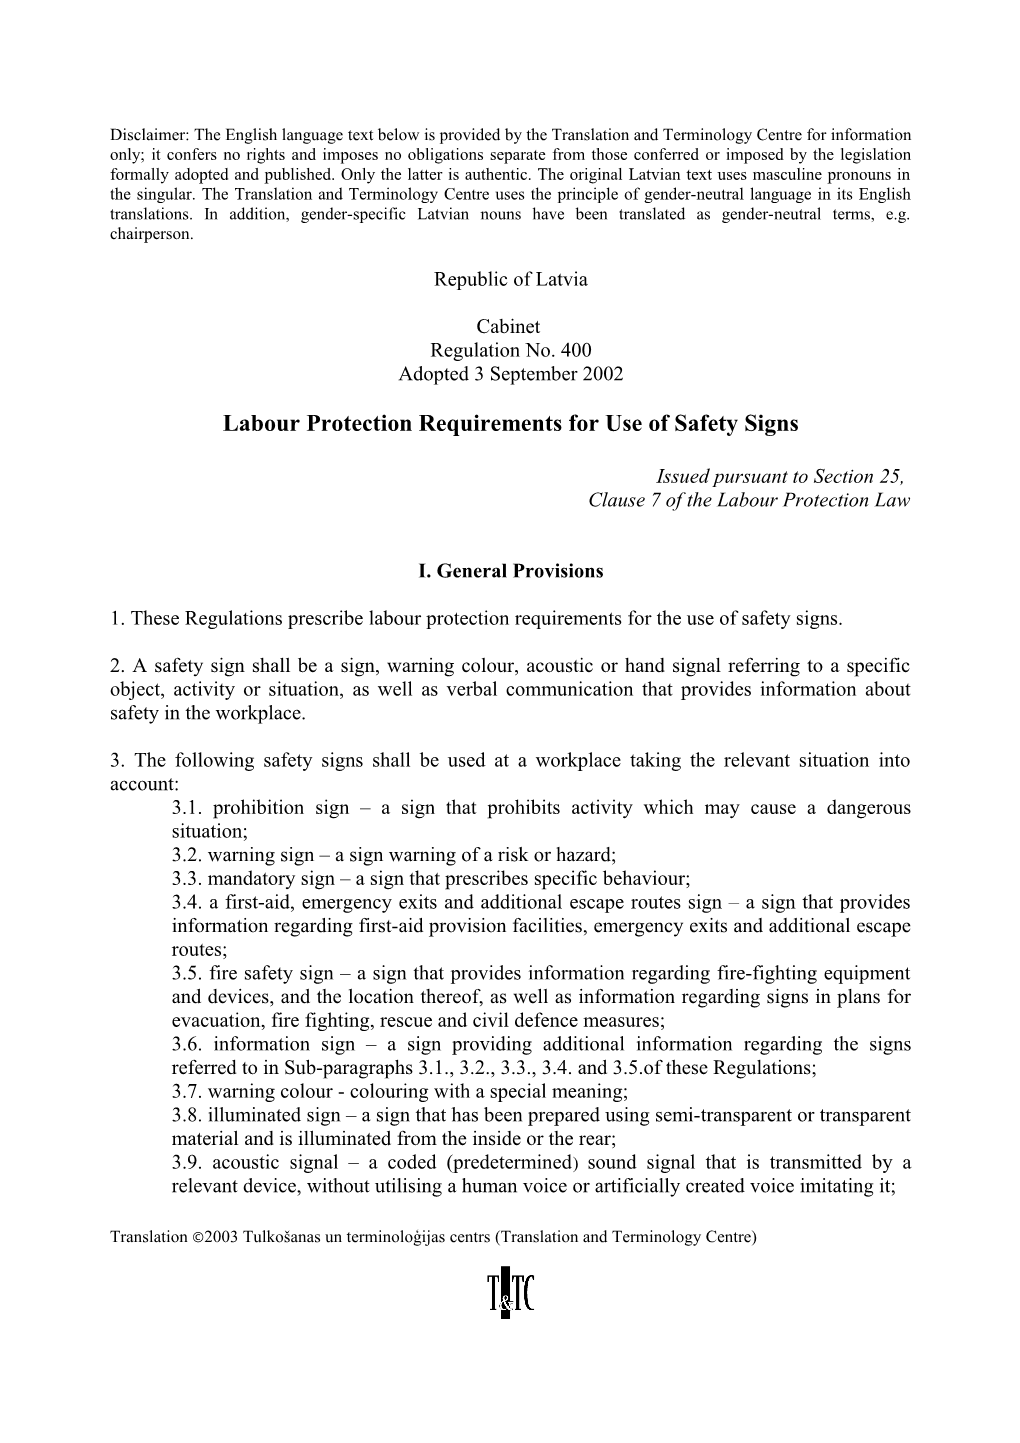 Labour Protection Requirements for Use of Safety Signs